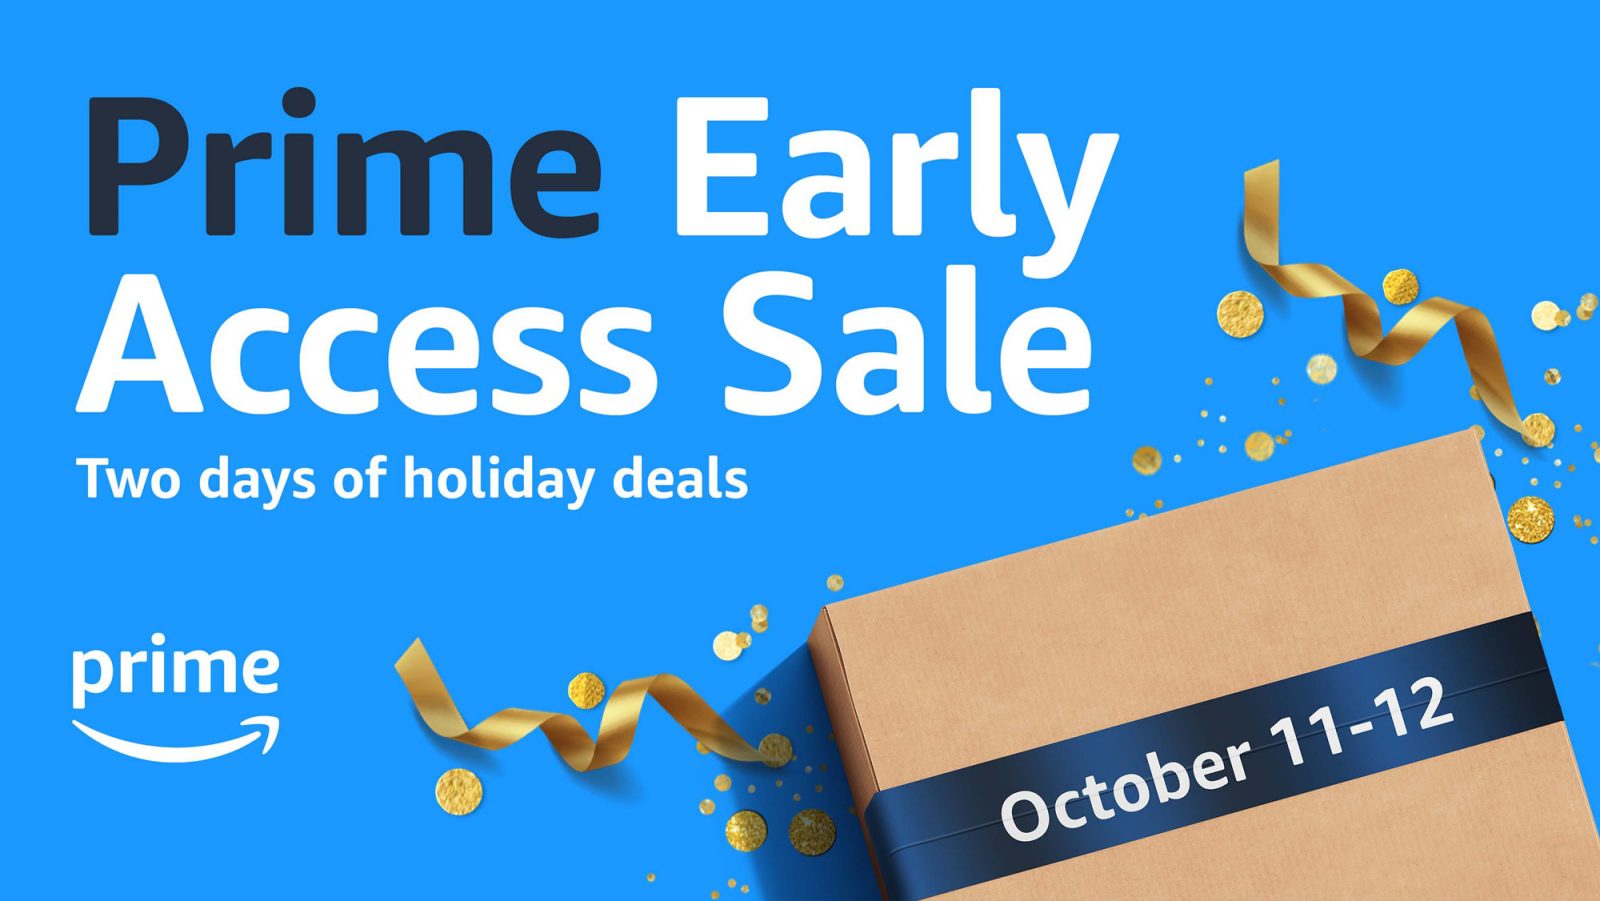 What is the Amazon Prime Early Access sale 2022?